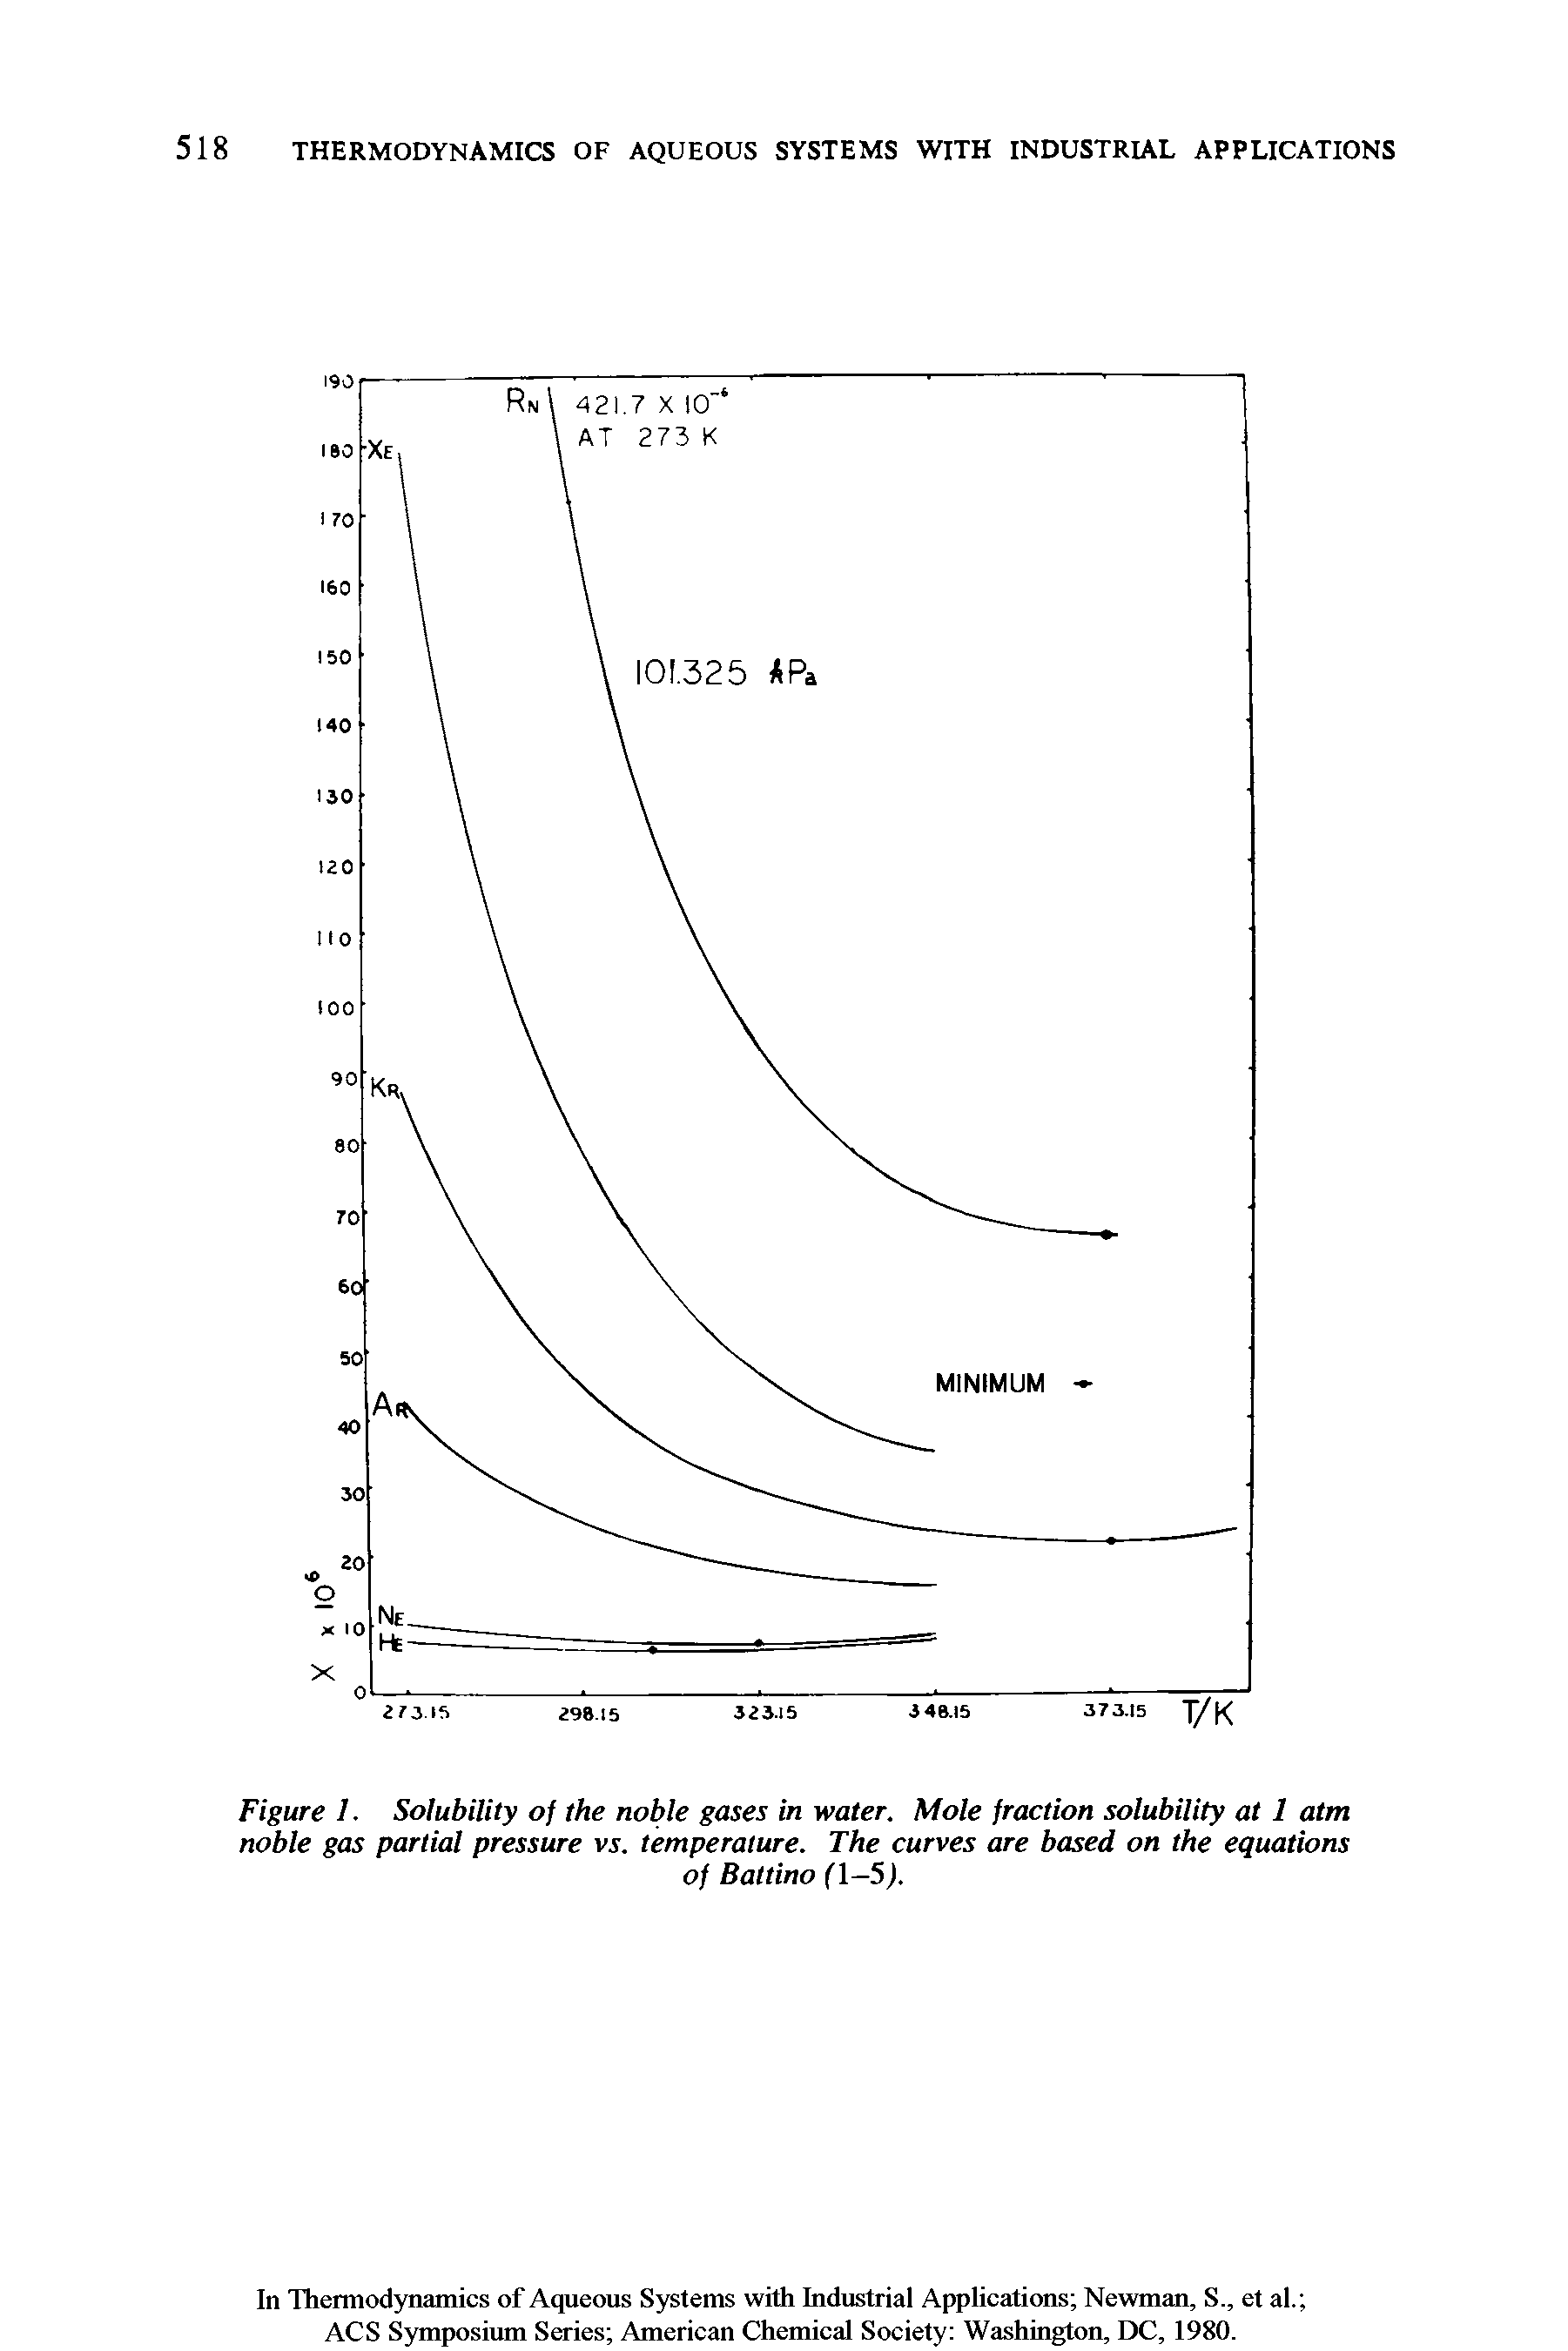 Figure 1. Solubility of the noble gases in water. Mole fraction solubility at 1 atm noble gas partial pressure vj. temperature. The curves are based on the equations...